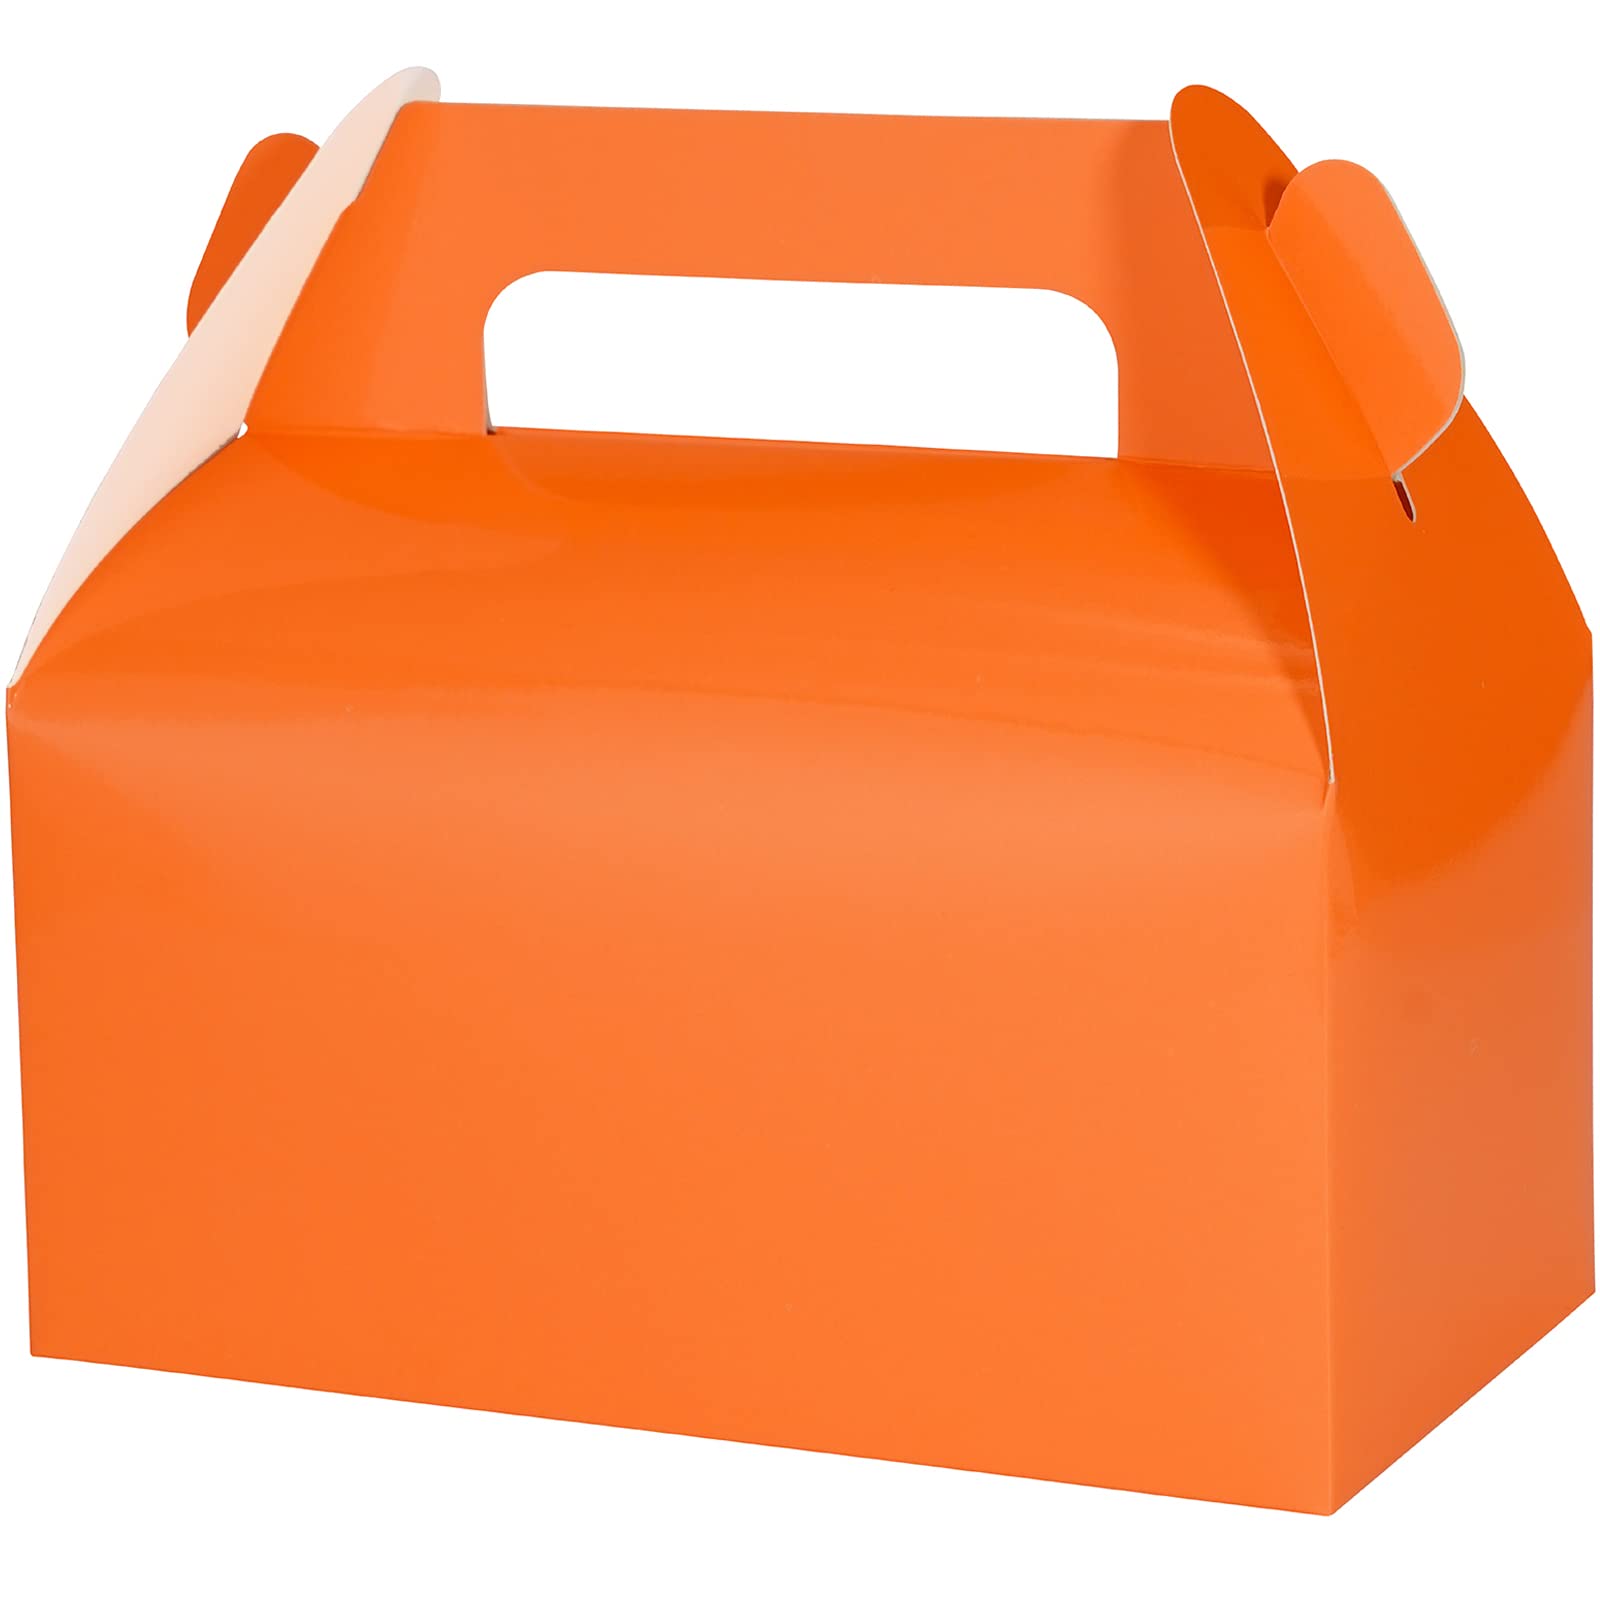 UnicoPak 30 Pack Shiny Orange Gable Treat Boxes, Party Favor Boxes, Candy Boxes Goodie Bags for Candy, Treats, Themed Birthday P